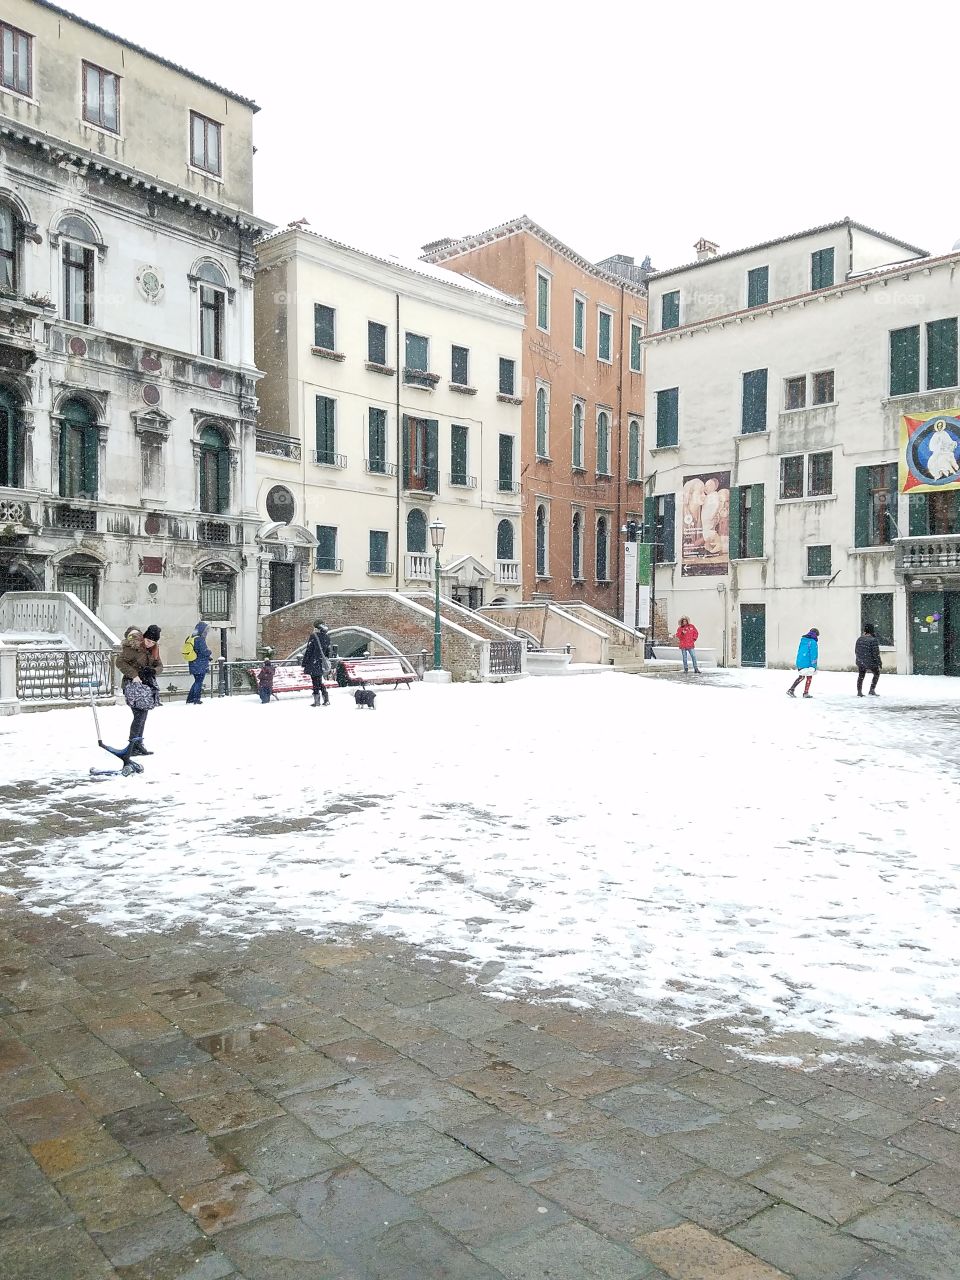 Families playing in snowy Venice